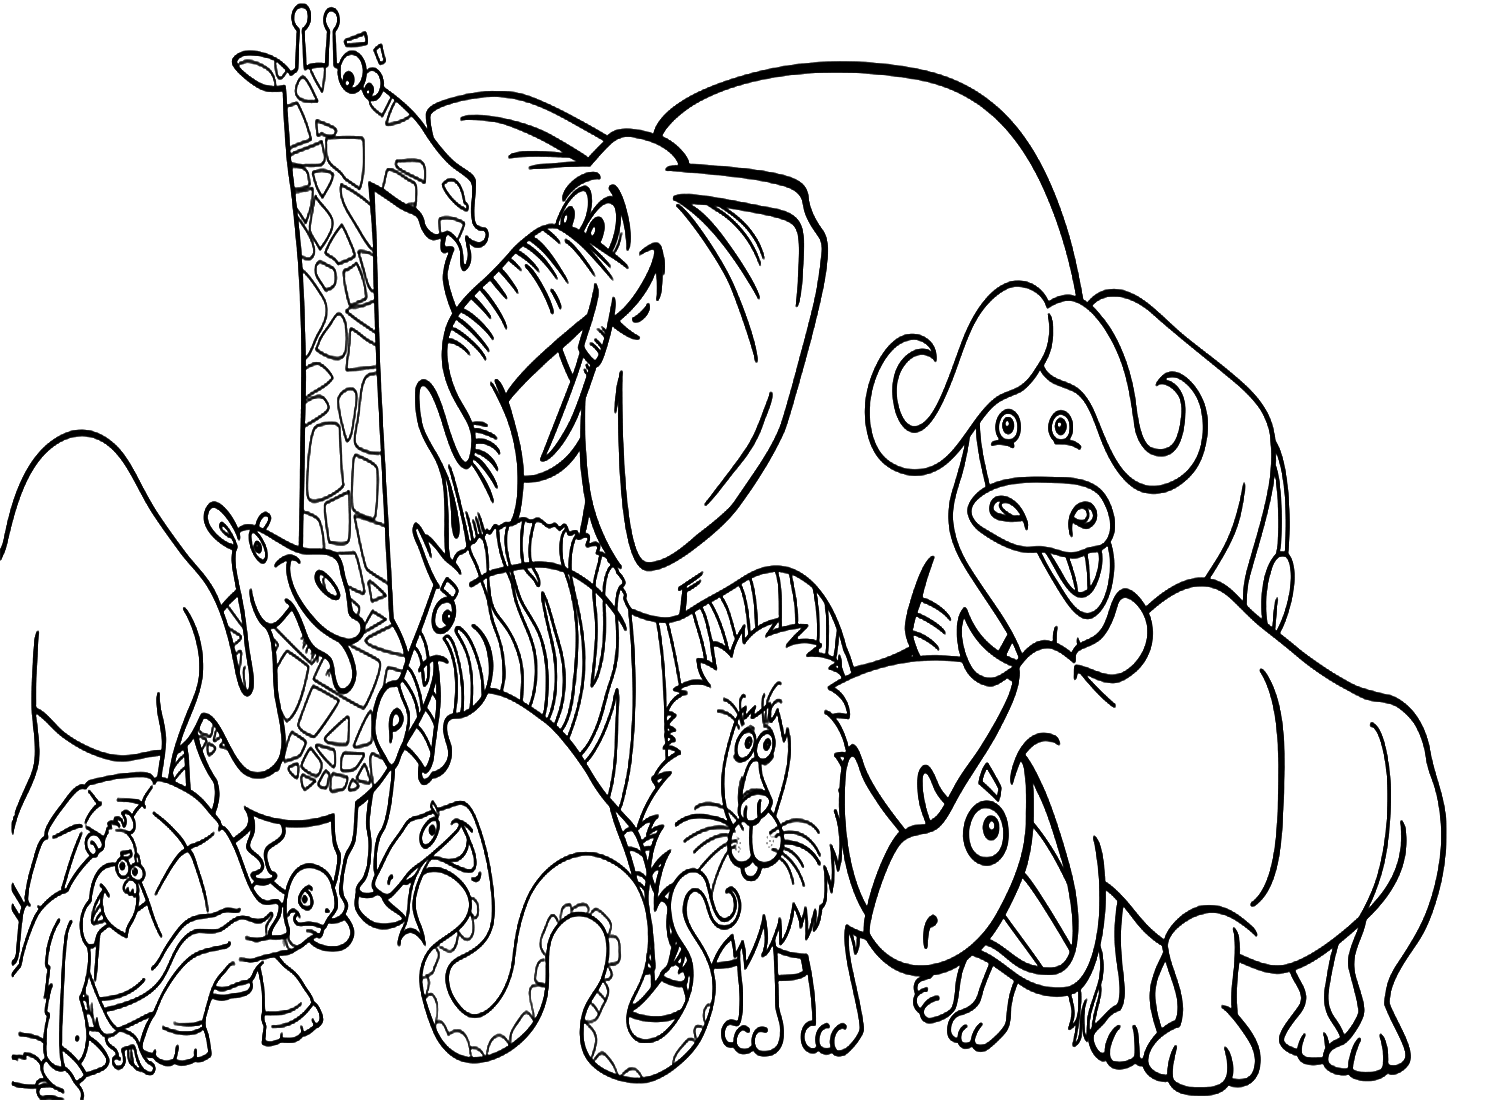 Free Zebra Coloring Pages